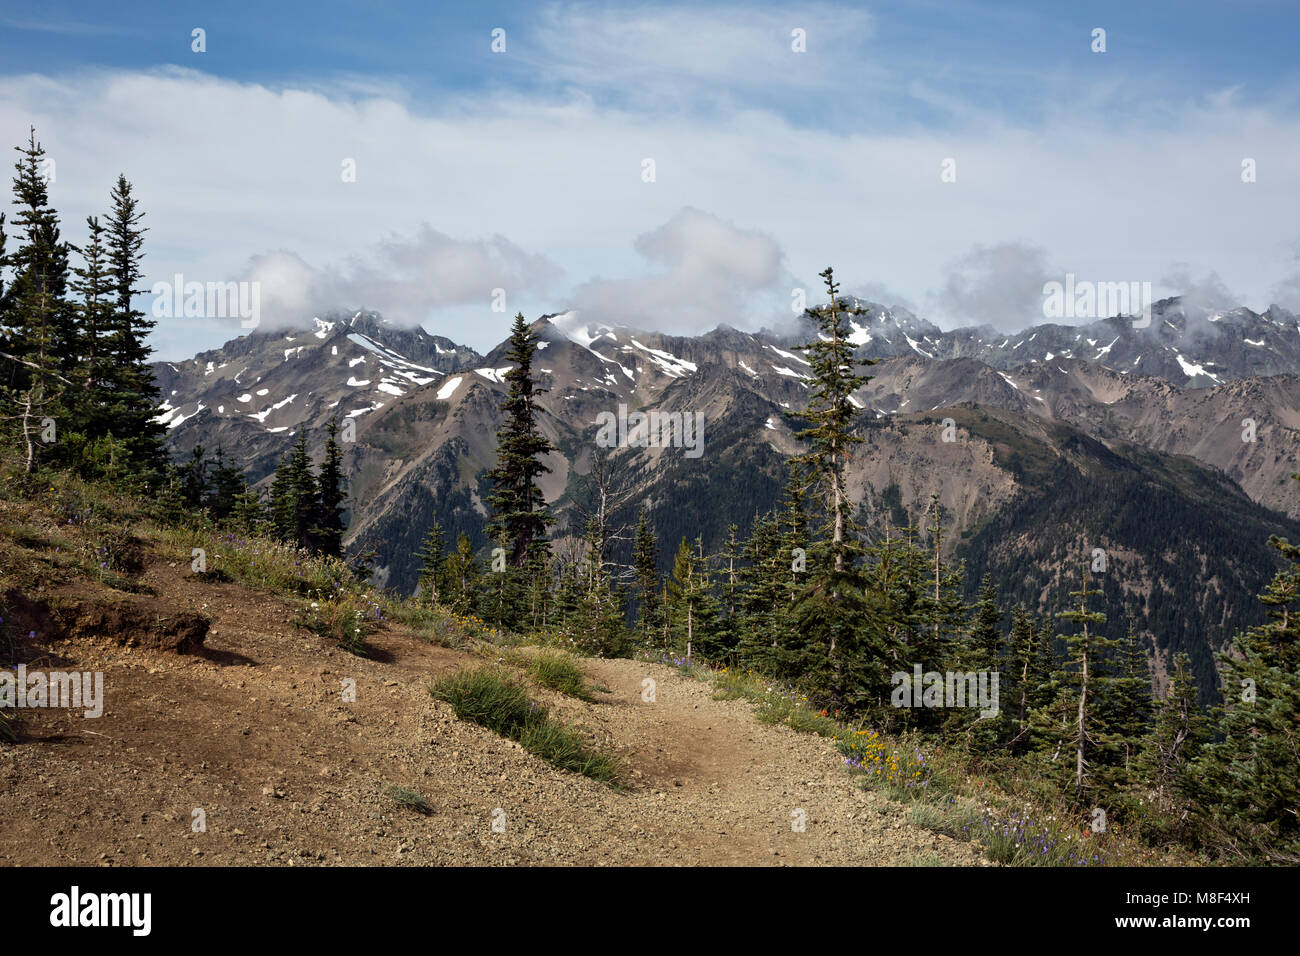 WA13889-00...WASHINGTON - View of the Olympics and the national park from Marmot Pass on the Big Quilcene Trail of Olympic National Forest. Stock Photo